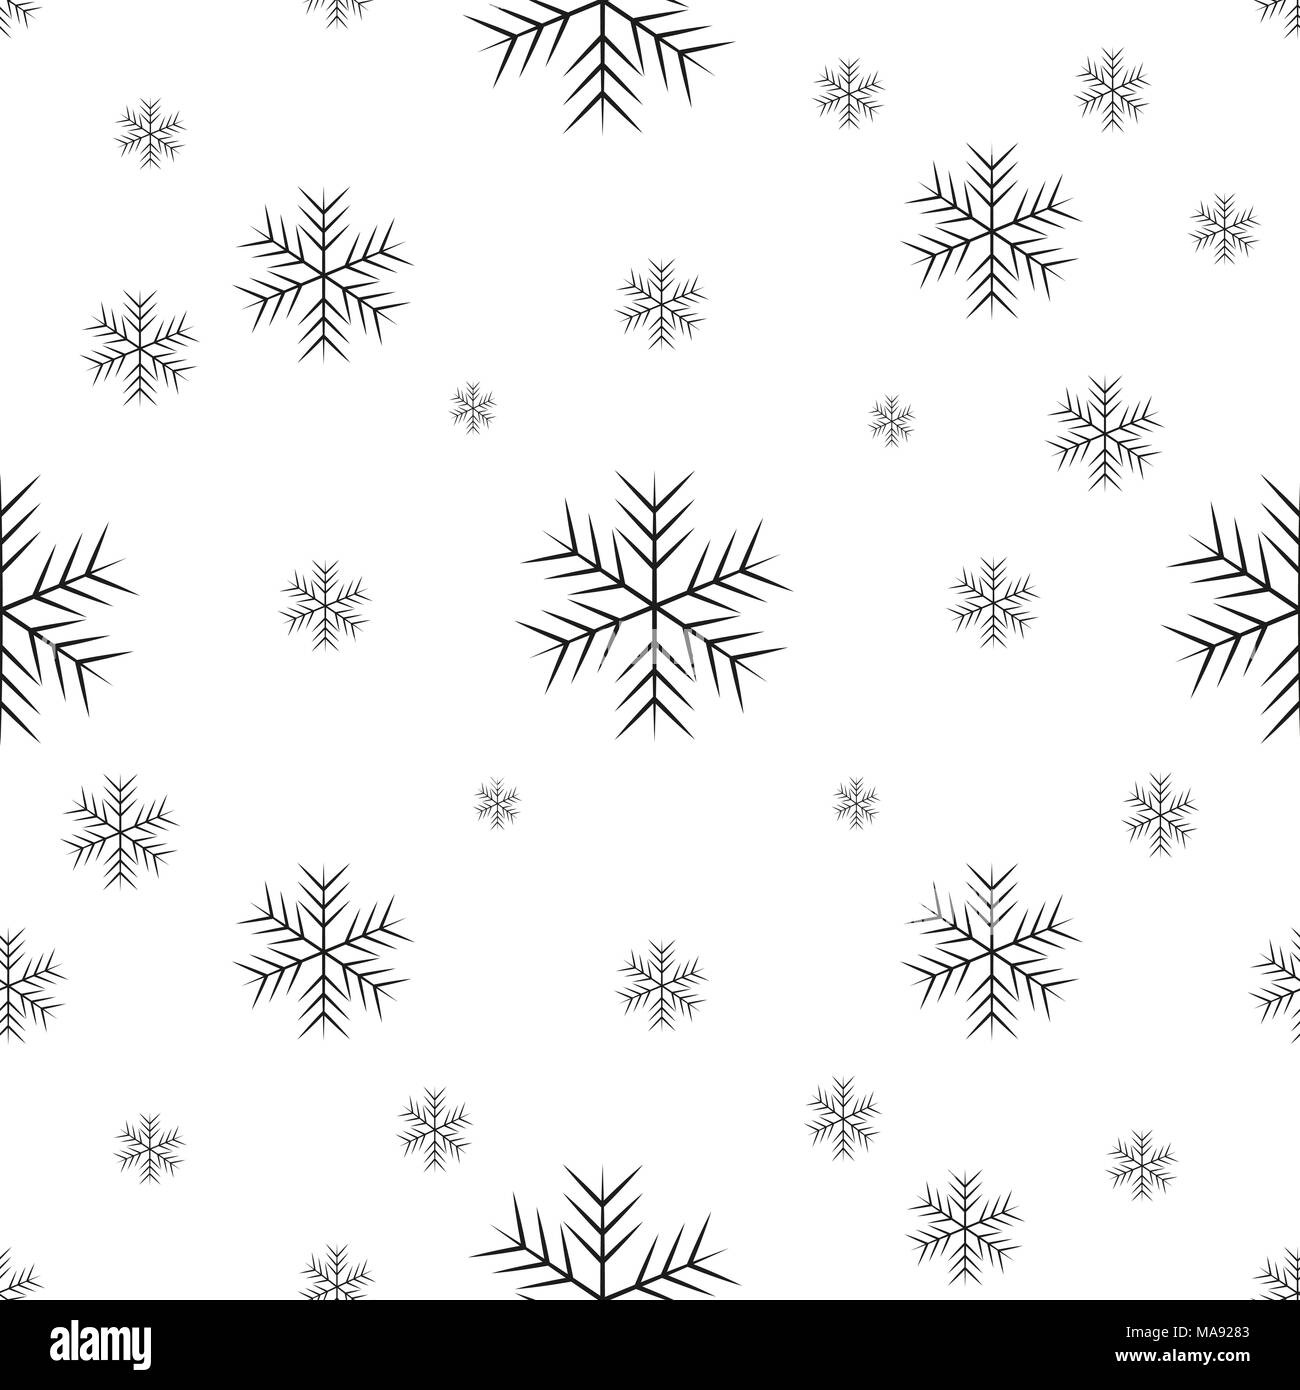 Seamless pattern Seamless pattern Seamless pattern Seamless pattern Seamless pattern Seamless pattern Seamless pattern Seamless pattern Seamless patte Stock Vector